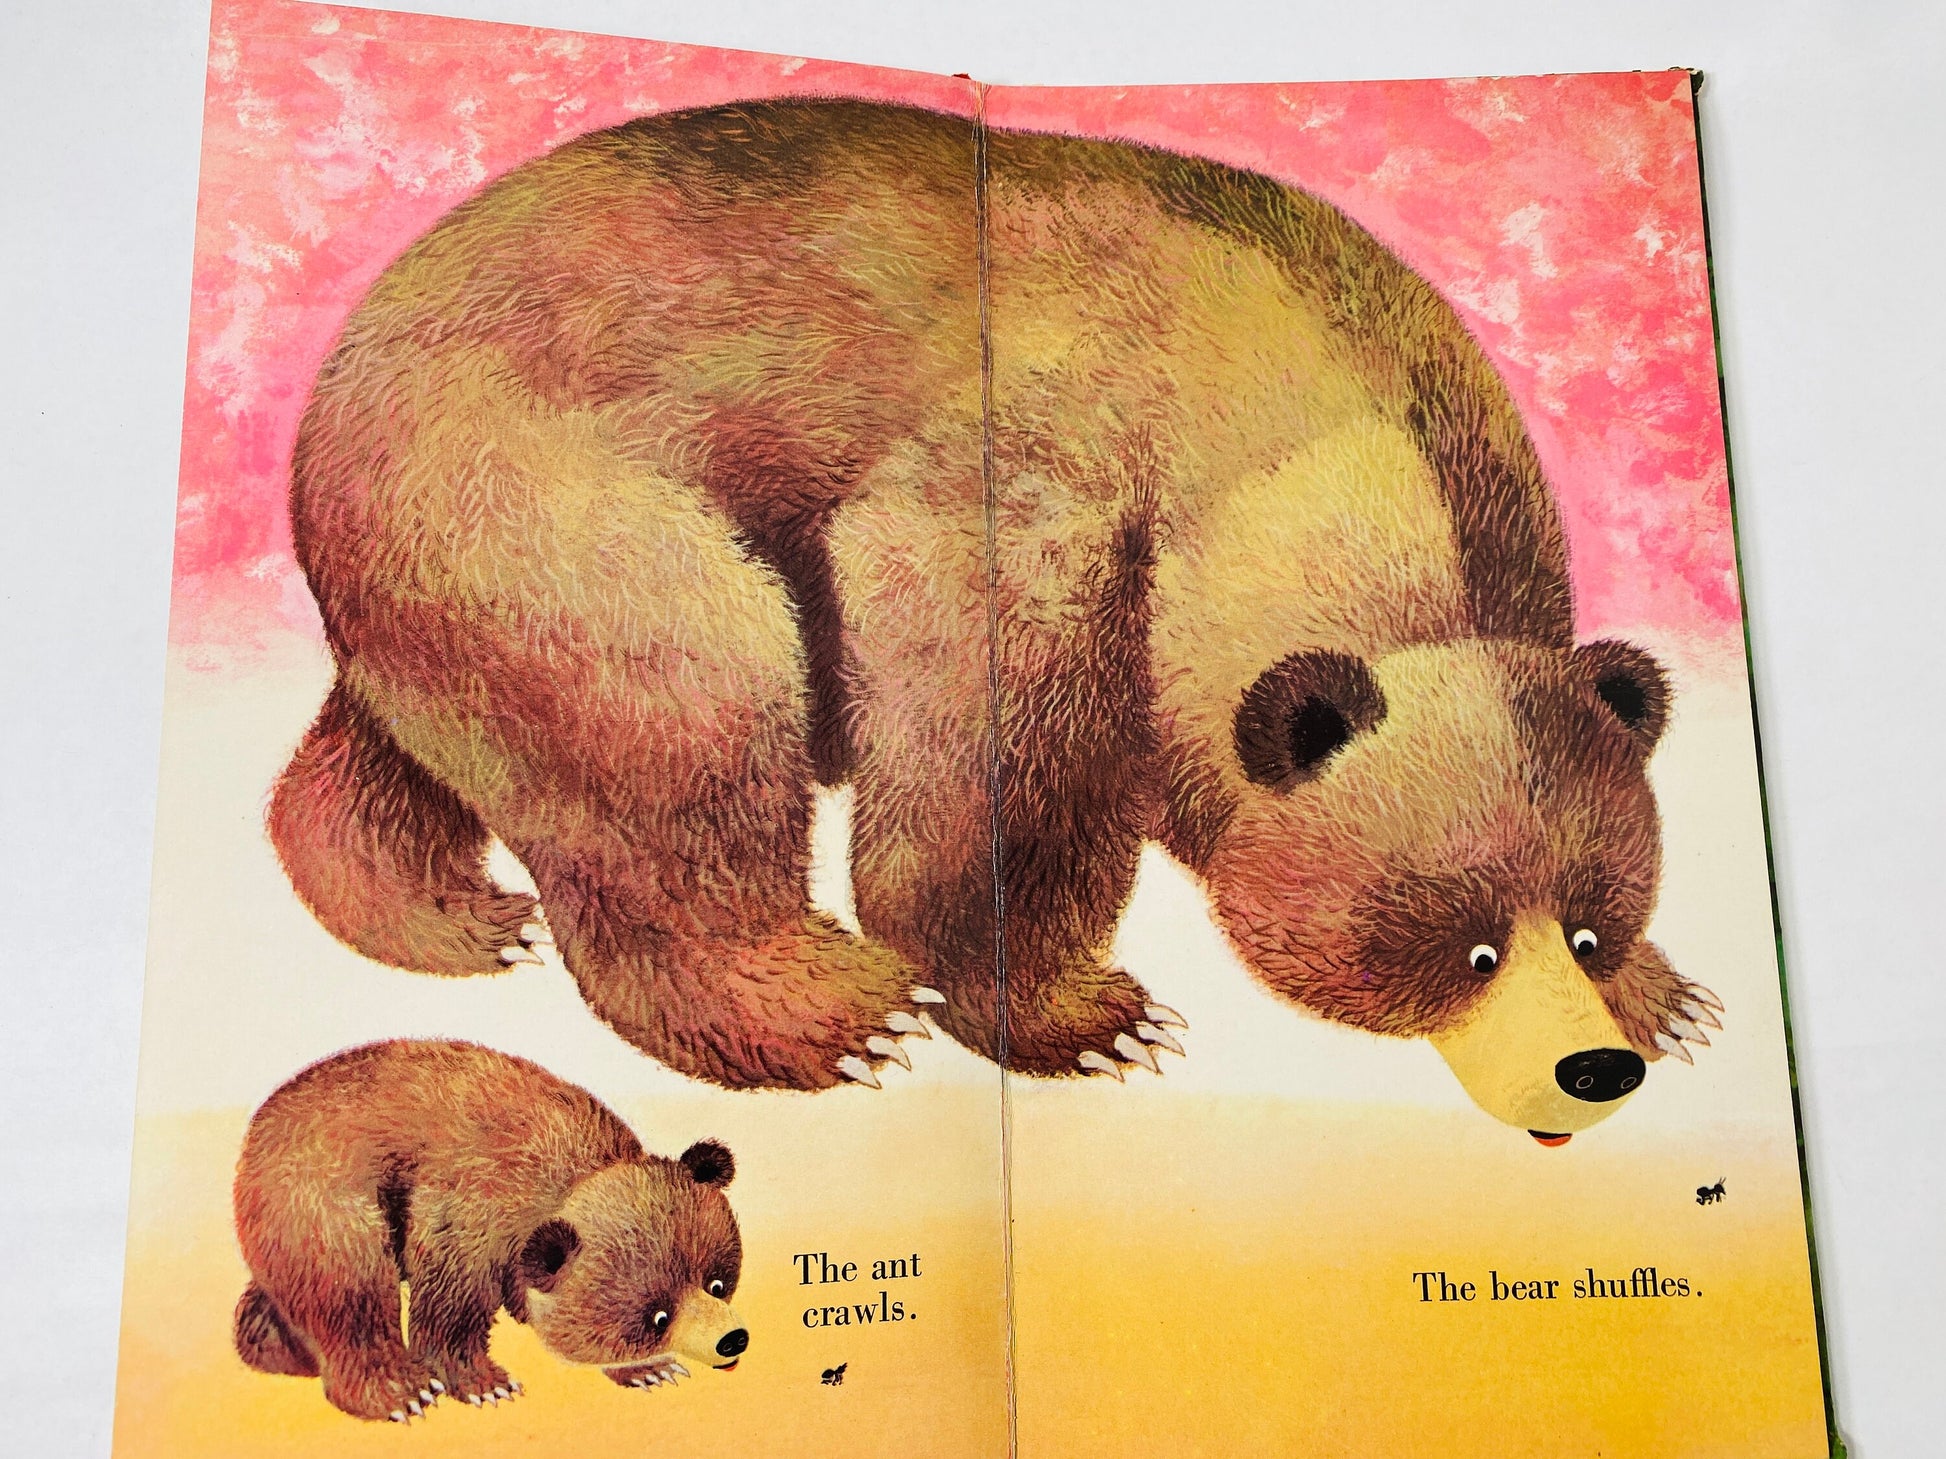 1975 Richard Scarry What Animals Do Vintage children's Golden Sturdy Happy book by one of the world's leading illustrators.